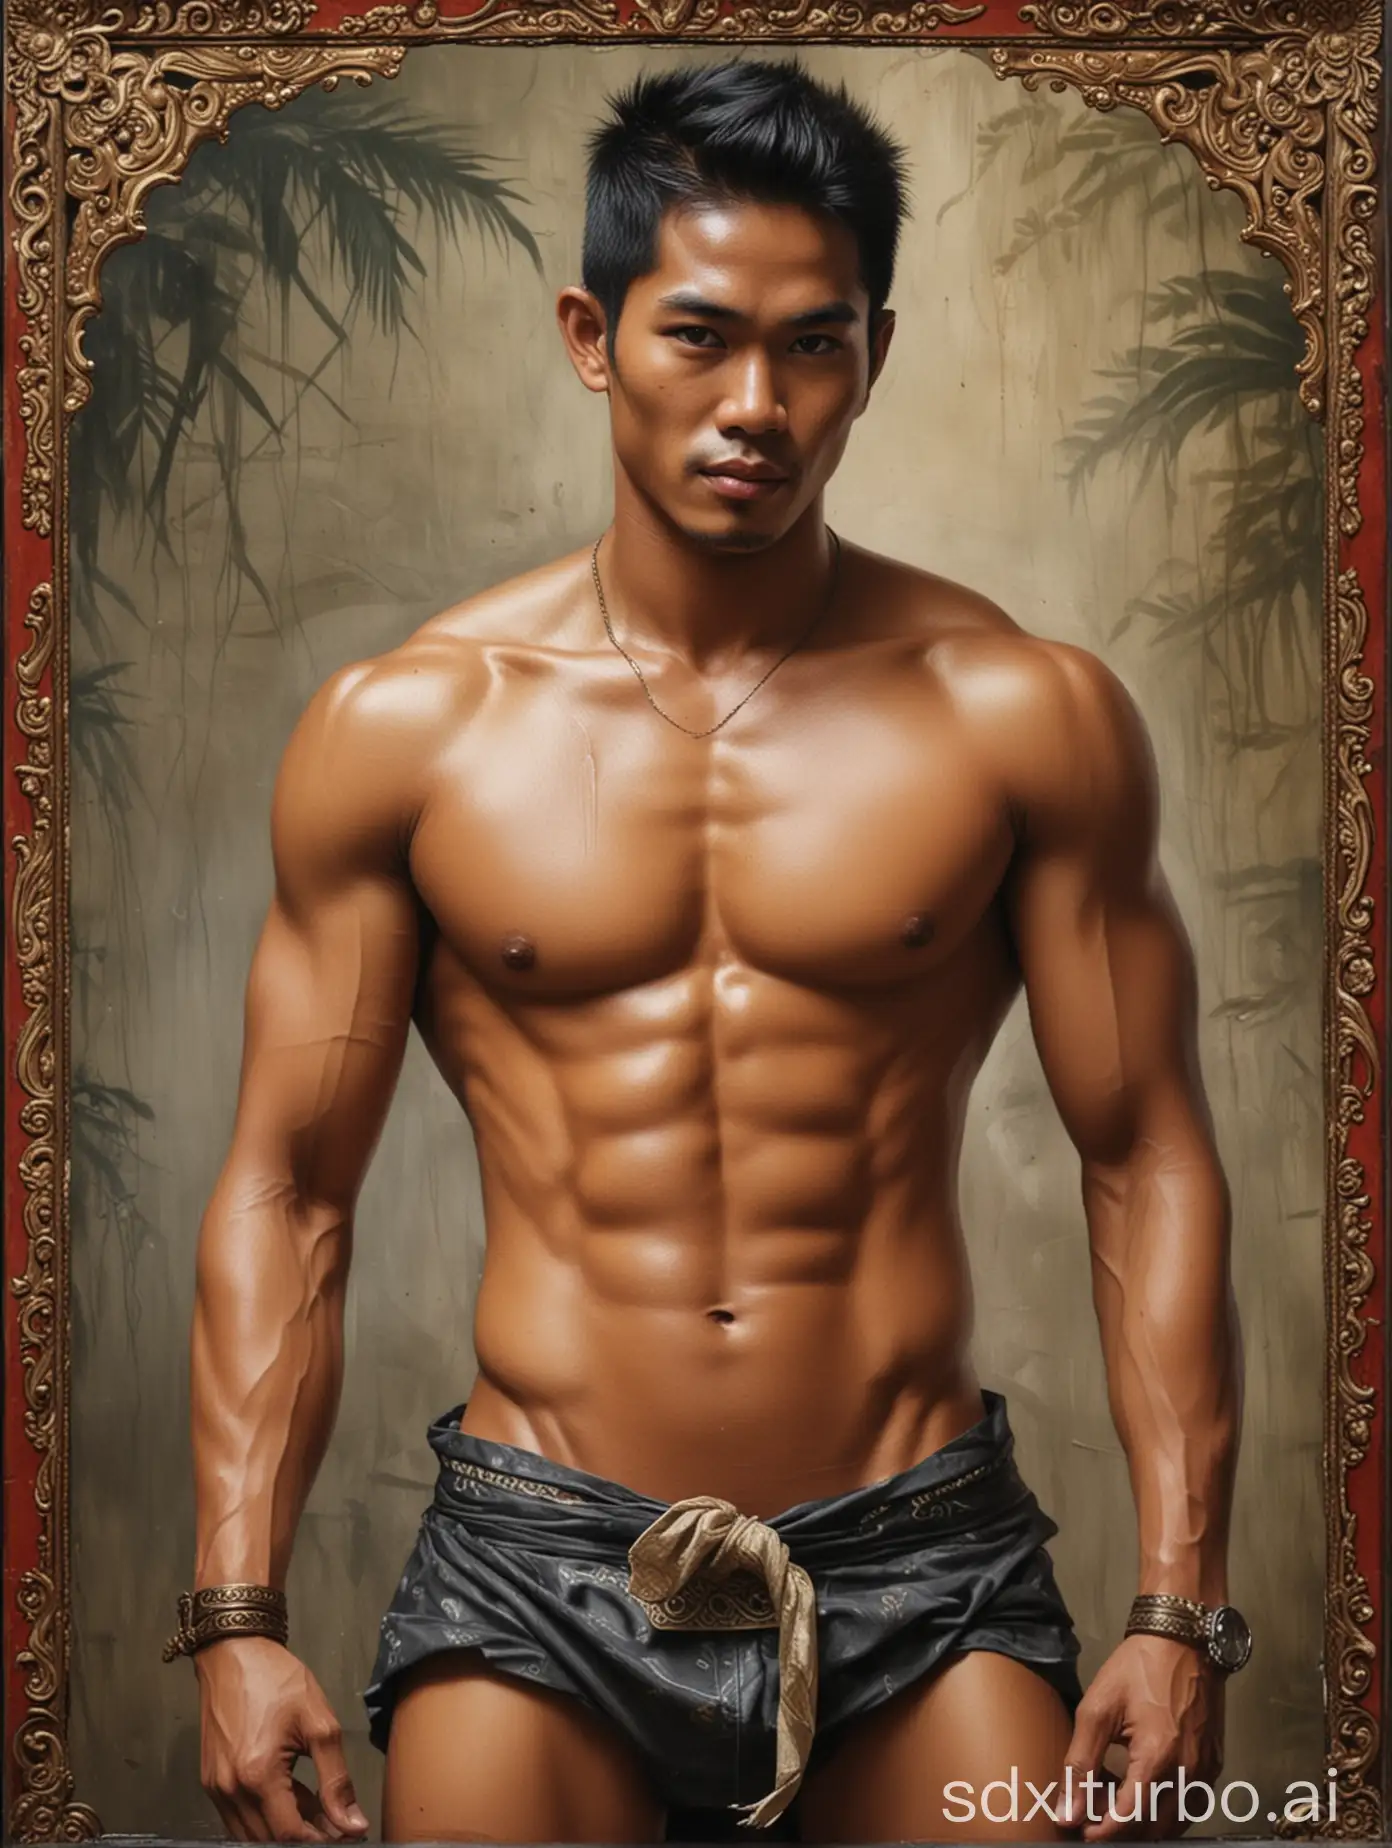 sexy Indonesian man in a Leyendender-style painting.